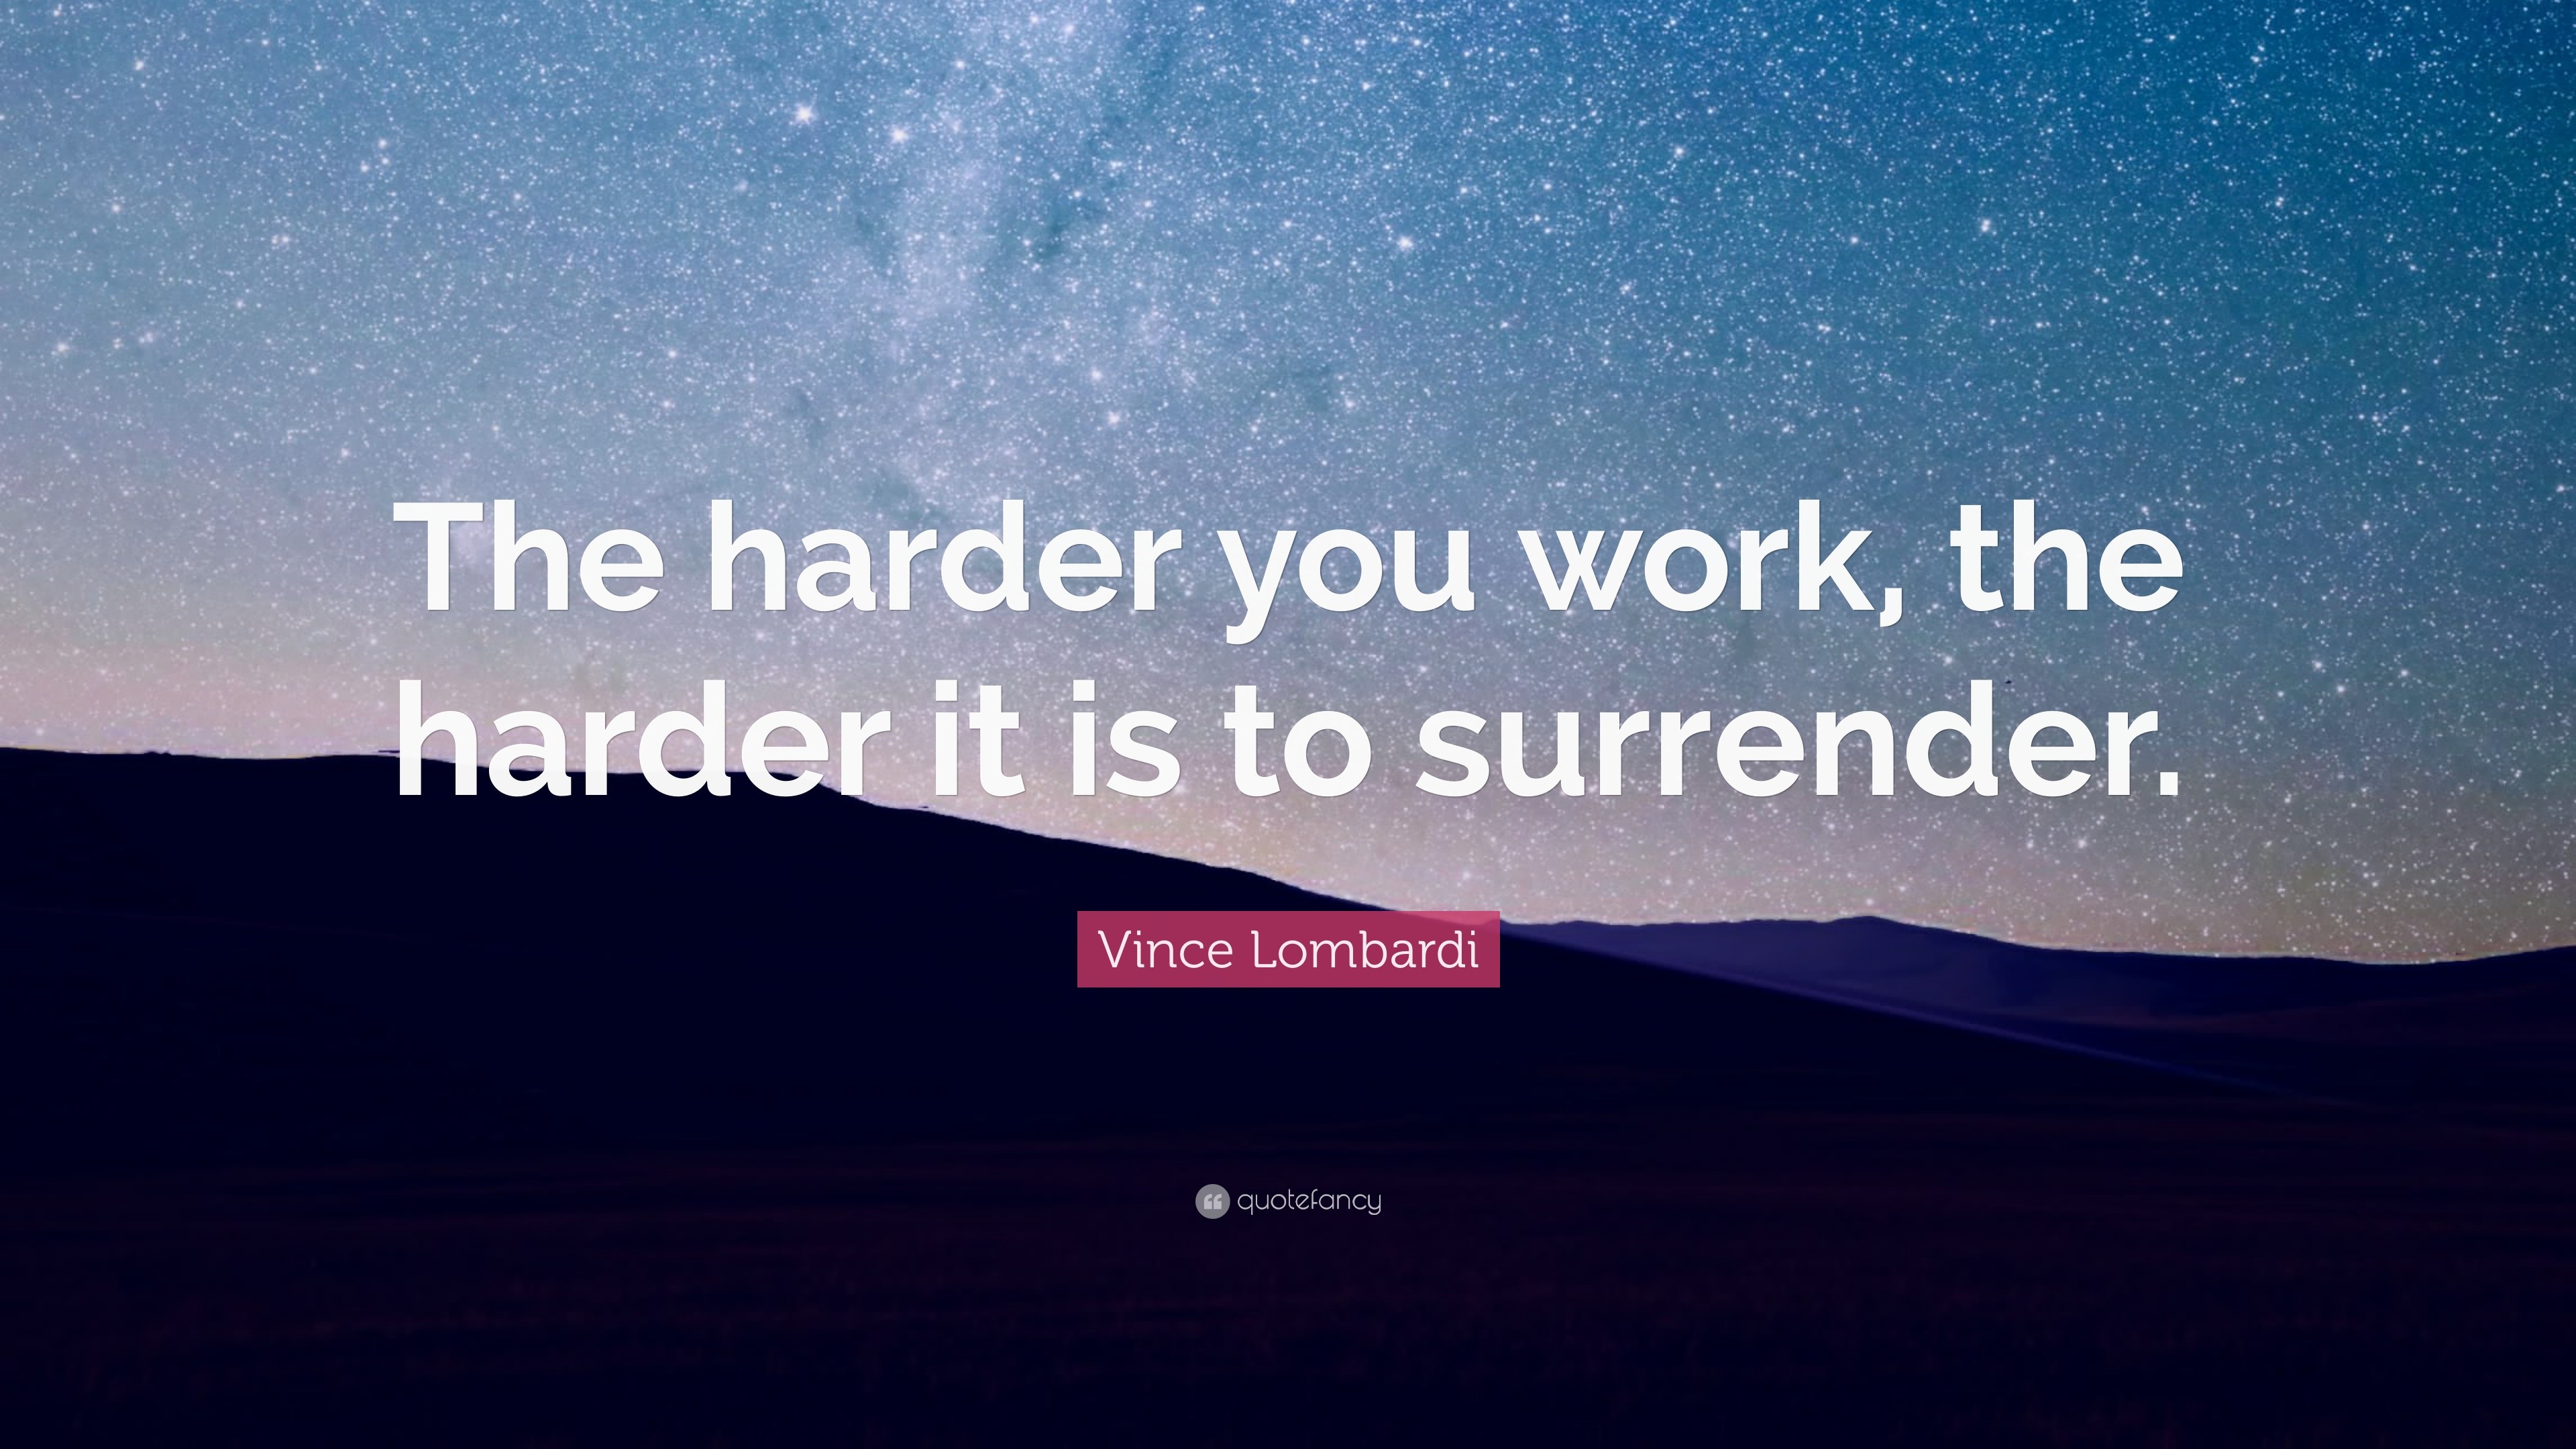 "the harder you work, the harder it is to surrender.